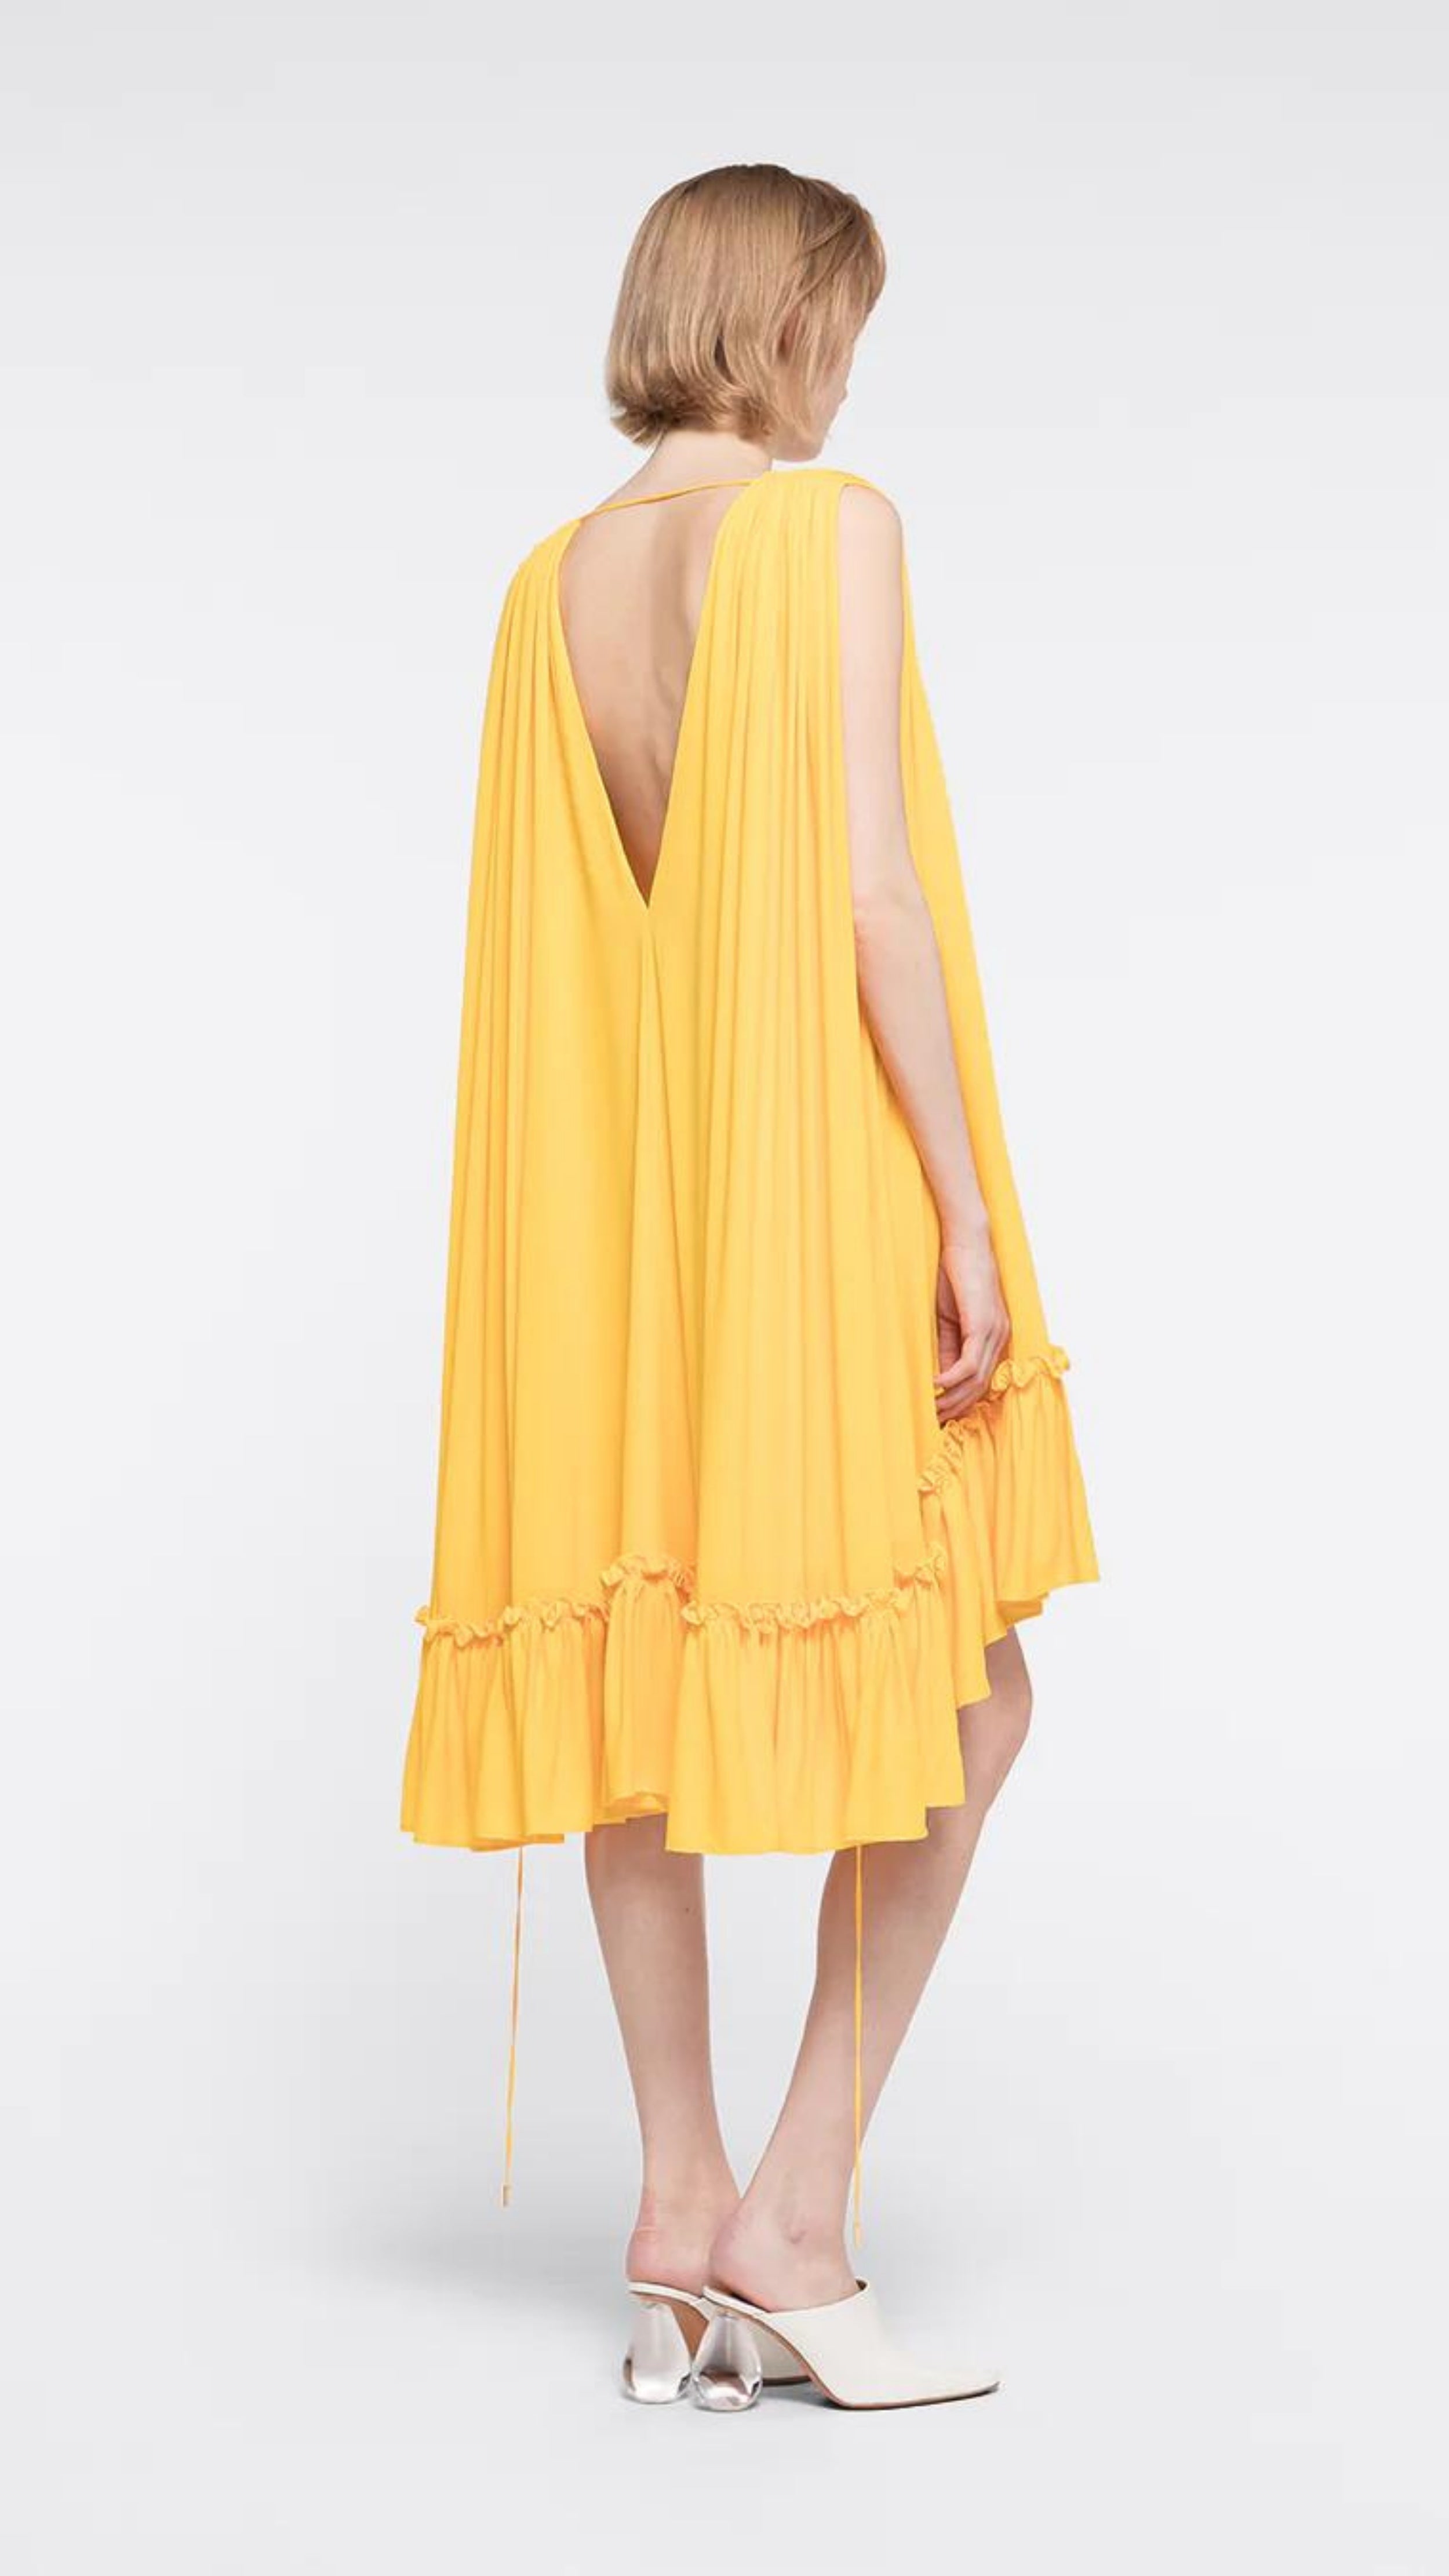 Az Factory Lutz Huelle Marilyn Dress. Bright yellow summer dress in trapeze style. With a v neck and volumnous a-line body and ruffled bottom. Shown on model facing back.